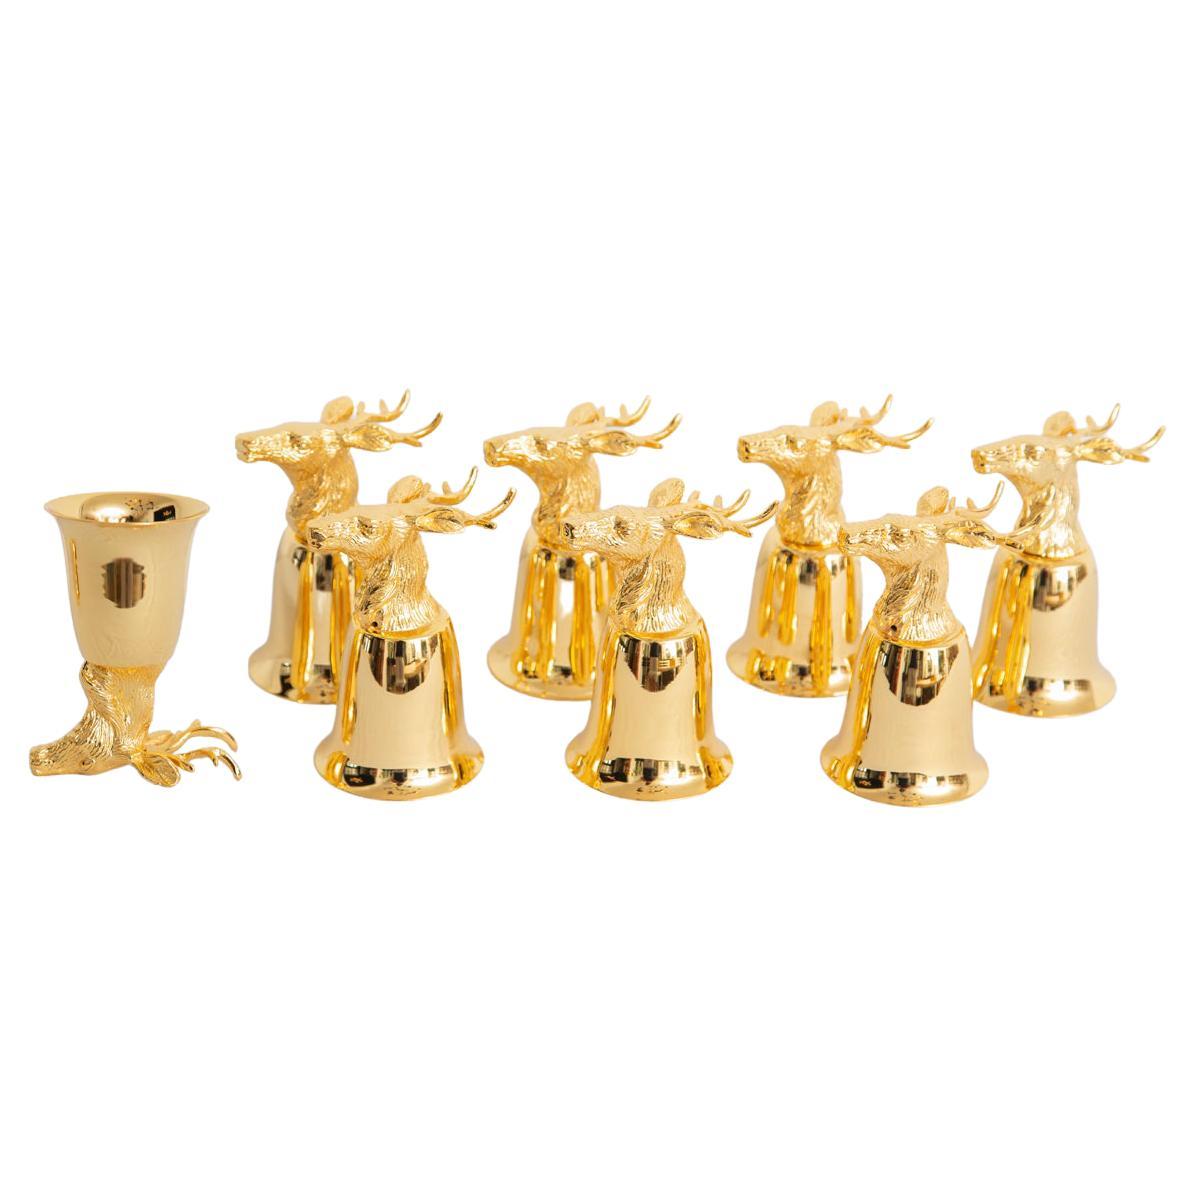 Set of 8 Gold Plated Stirrup Cups Goblets with Animal Heads, Stags For Sale